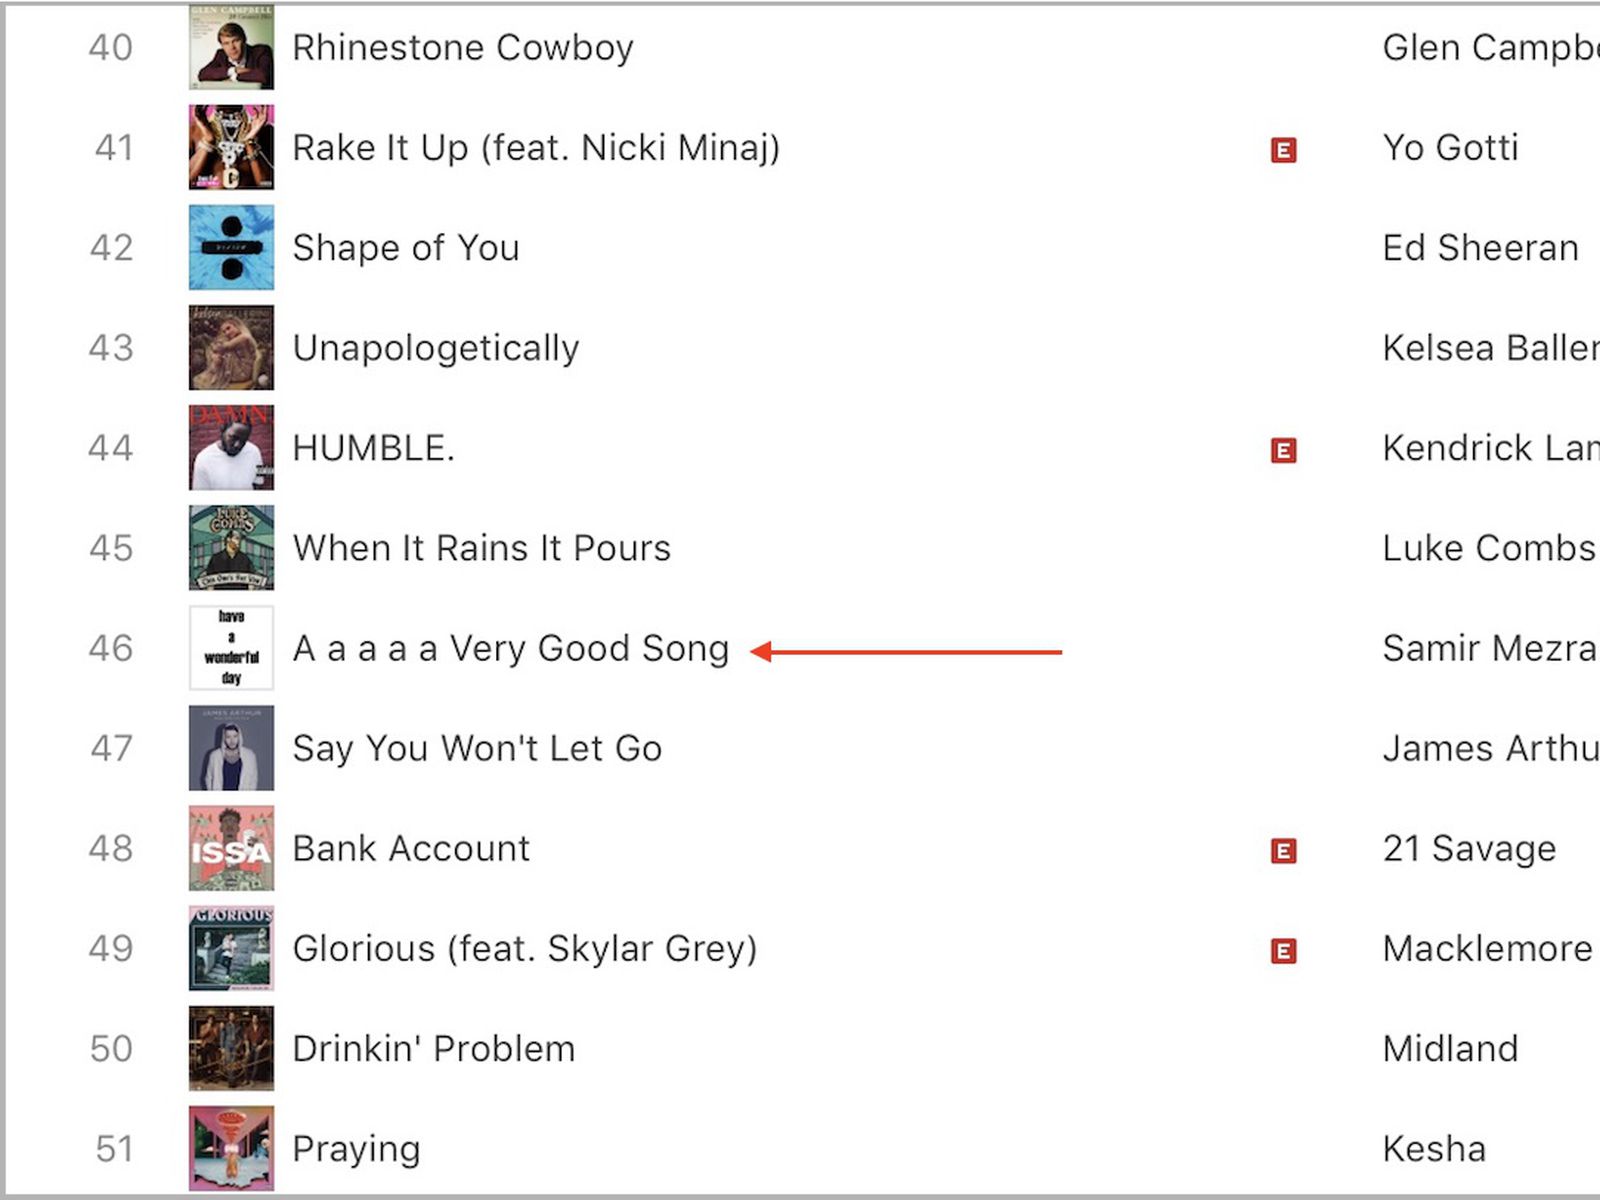 Whitney paraply Overvind A Ten-Minute Silent Song Is Soaring Up the iTunes Charts - MacRumors